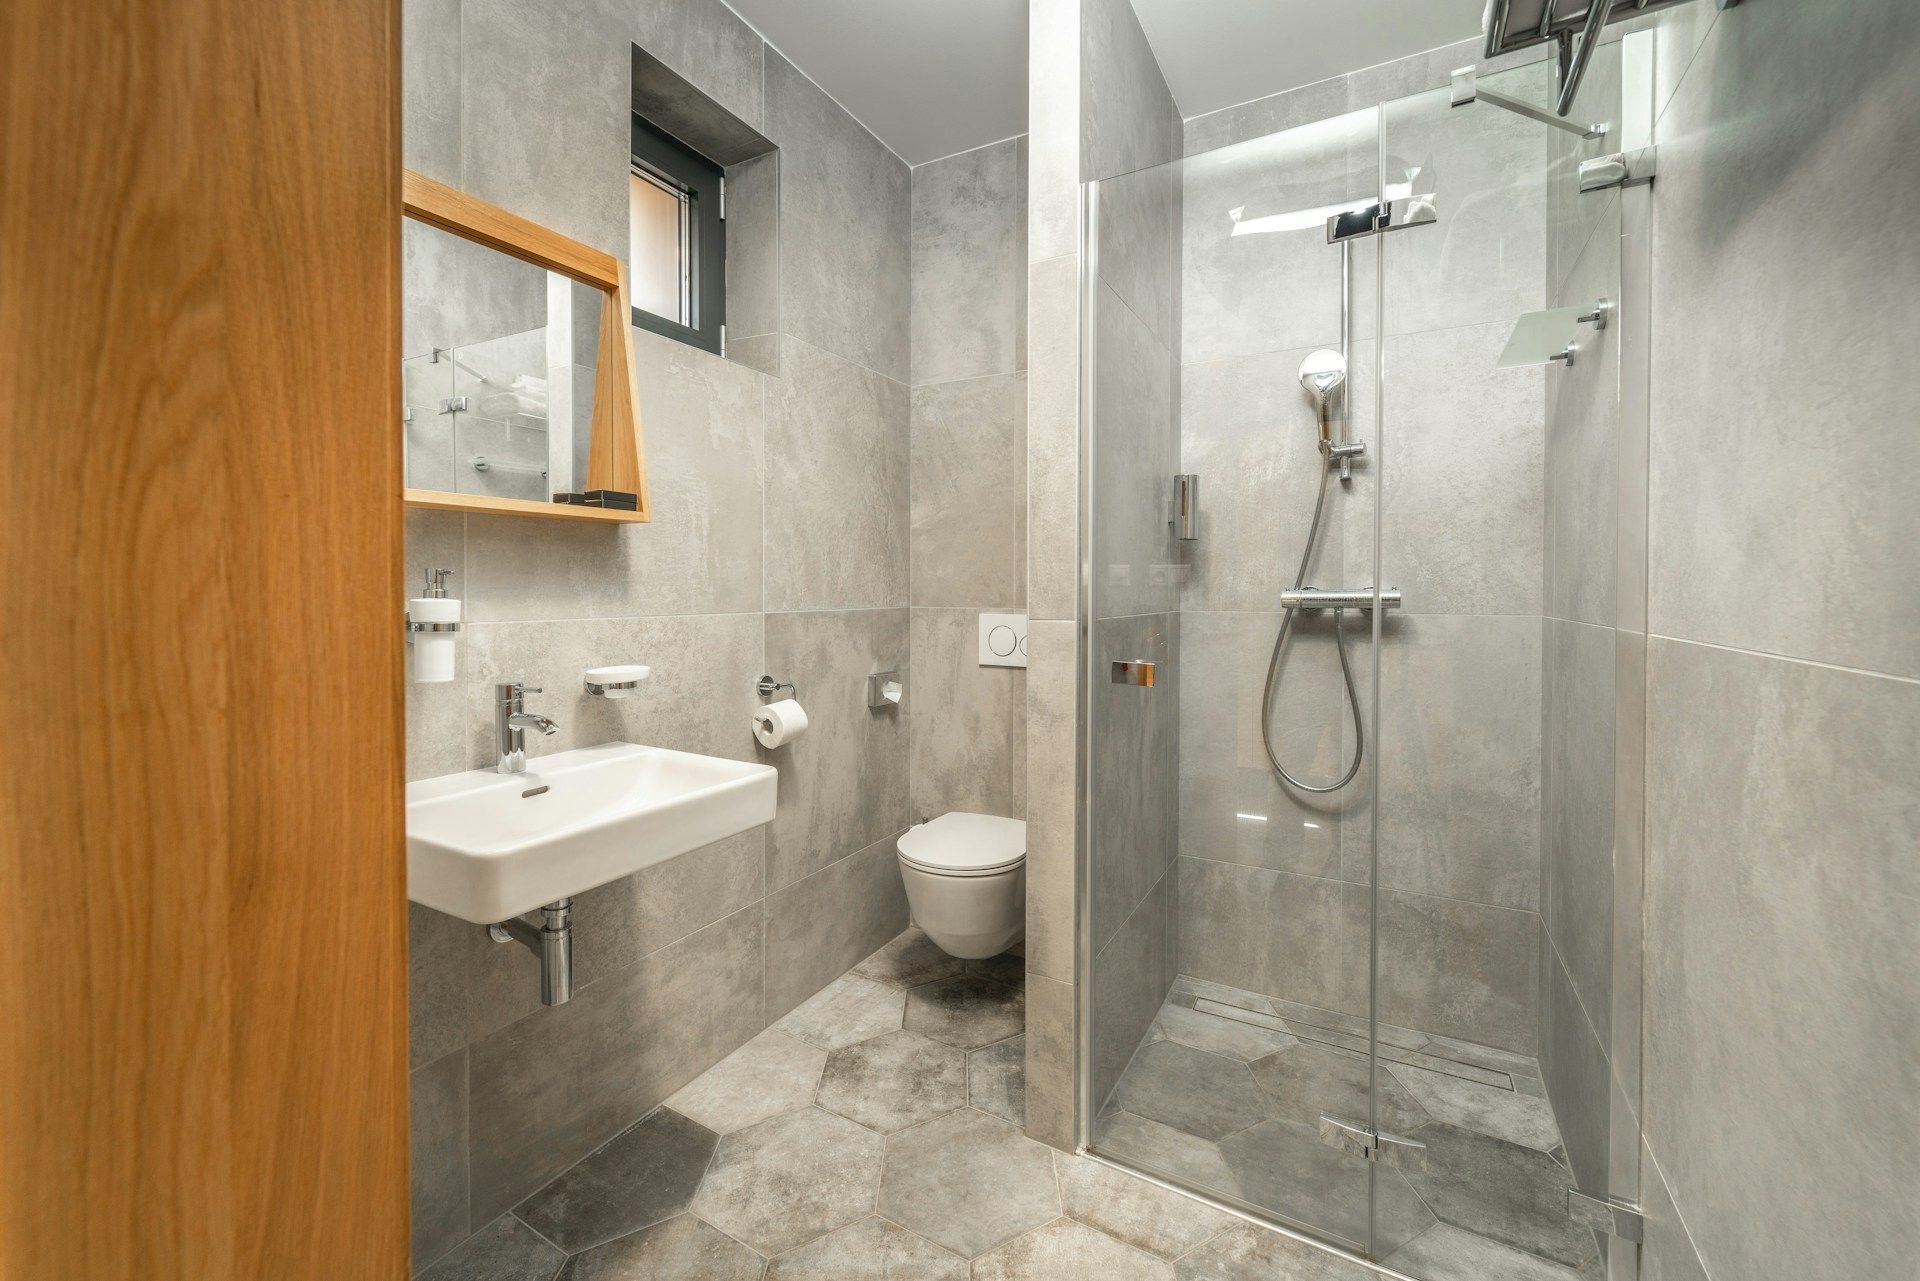 A bathroom with a toilet , sink , and walk in shower.